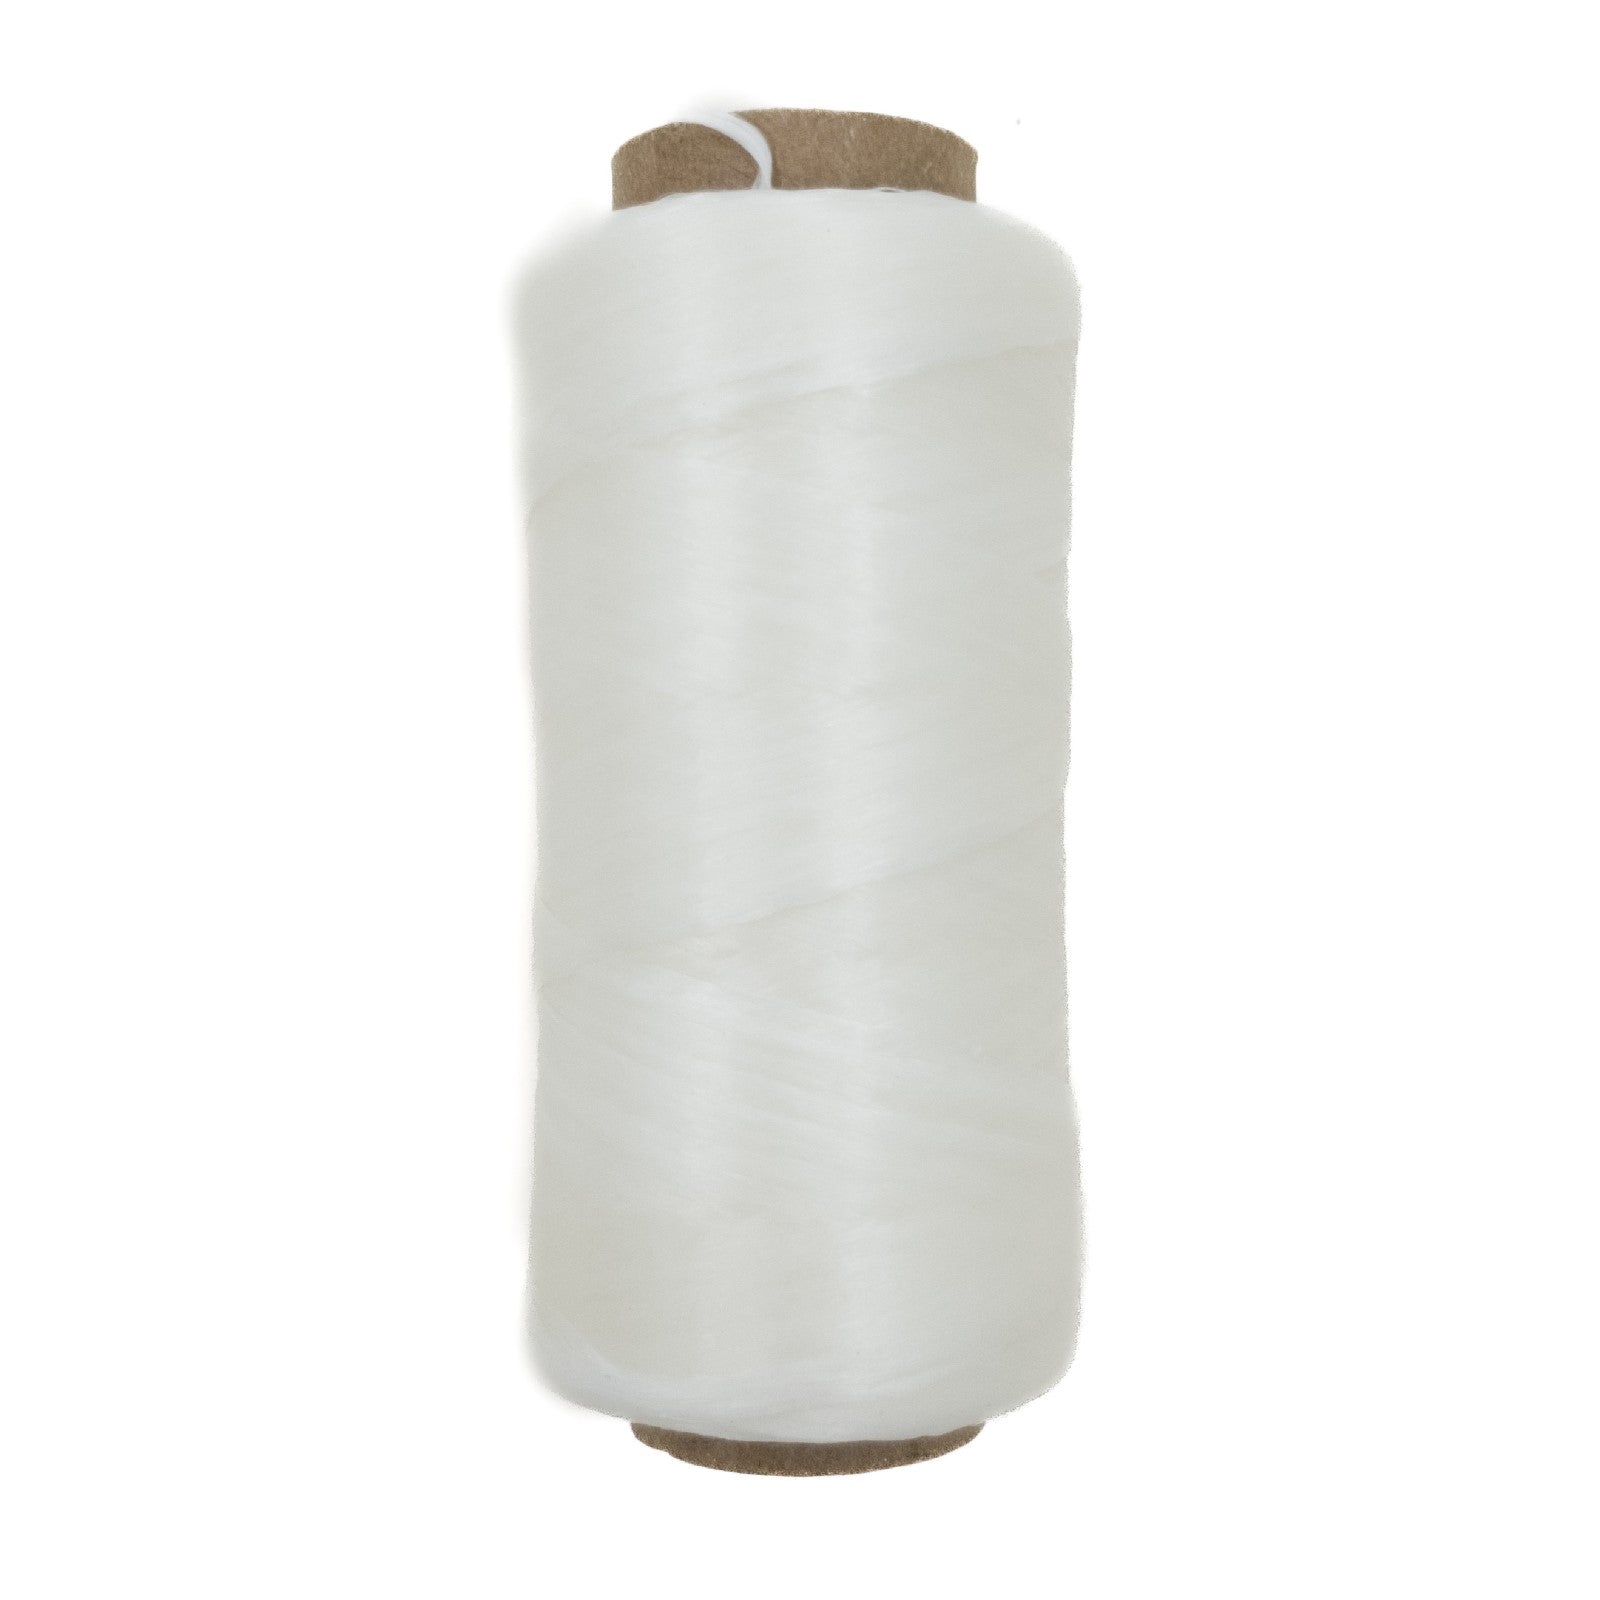 Buy Artificial Sinew 20 yard Roll Online - Montana Leather Company